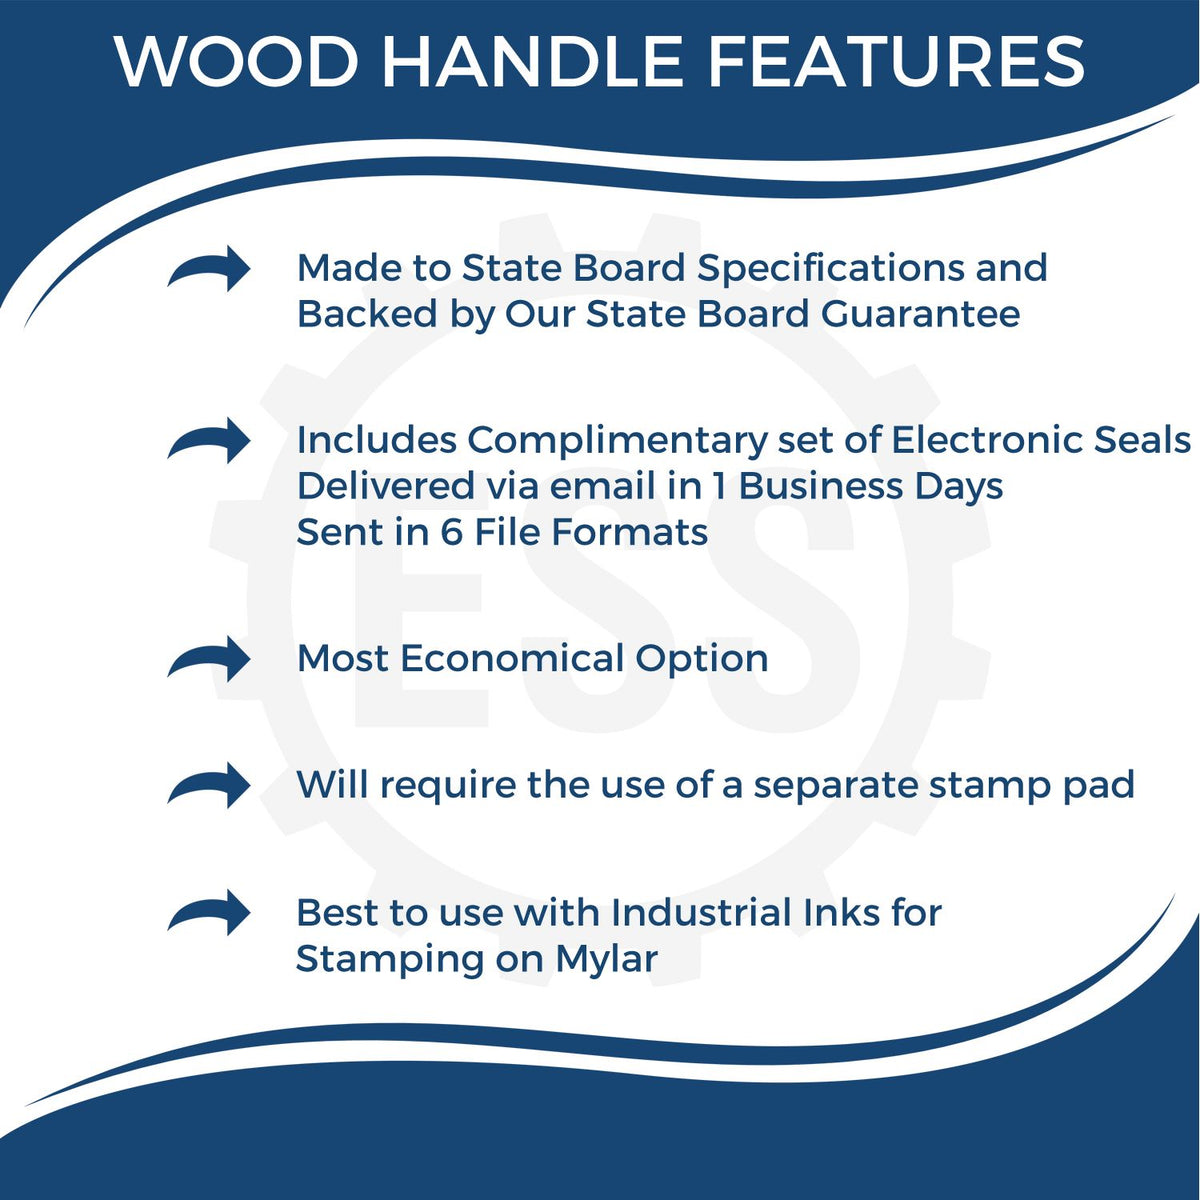 A picture of an infographic highlighting the selling points for the Wooden Handle Illinois Rectangular Notary Public Stamp